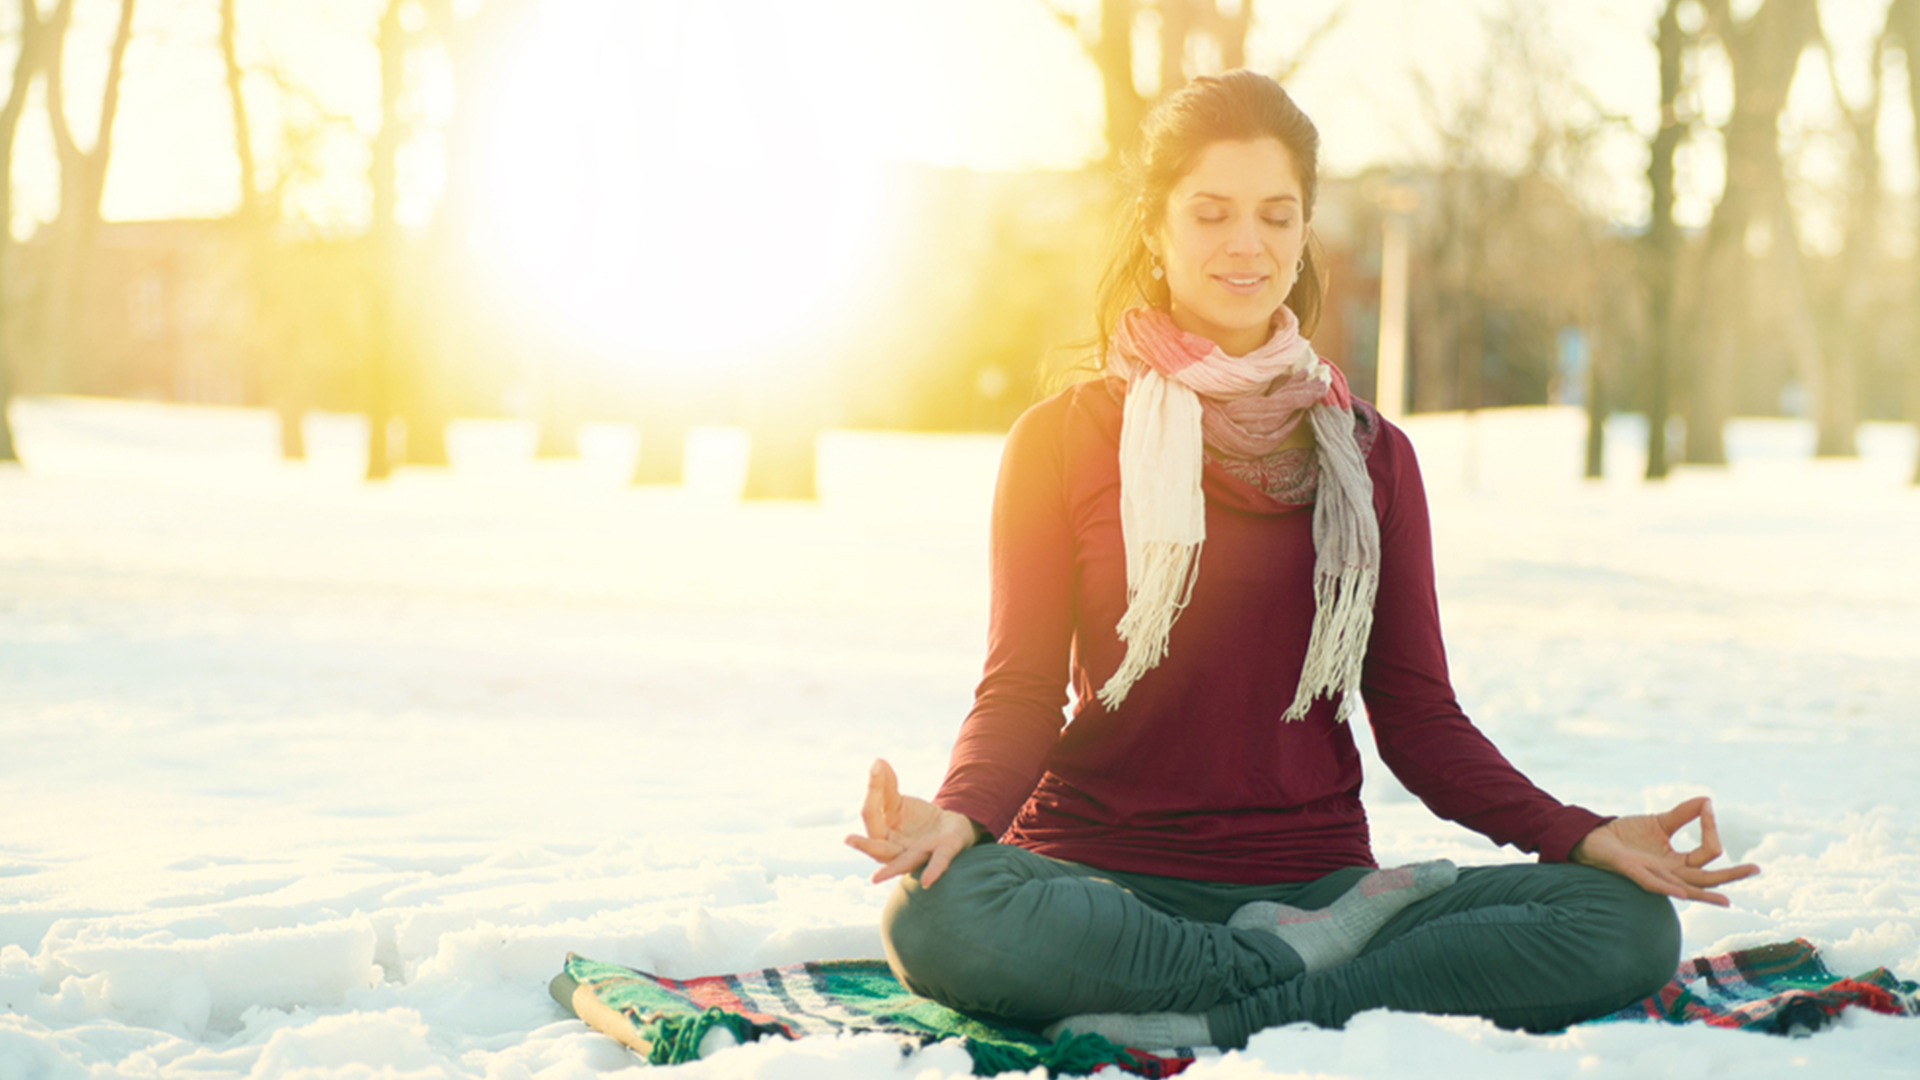 Healthy Winter: How to stay active/fit during winters?